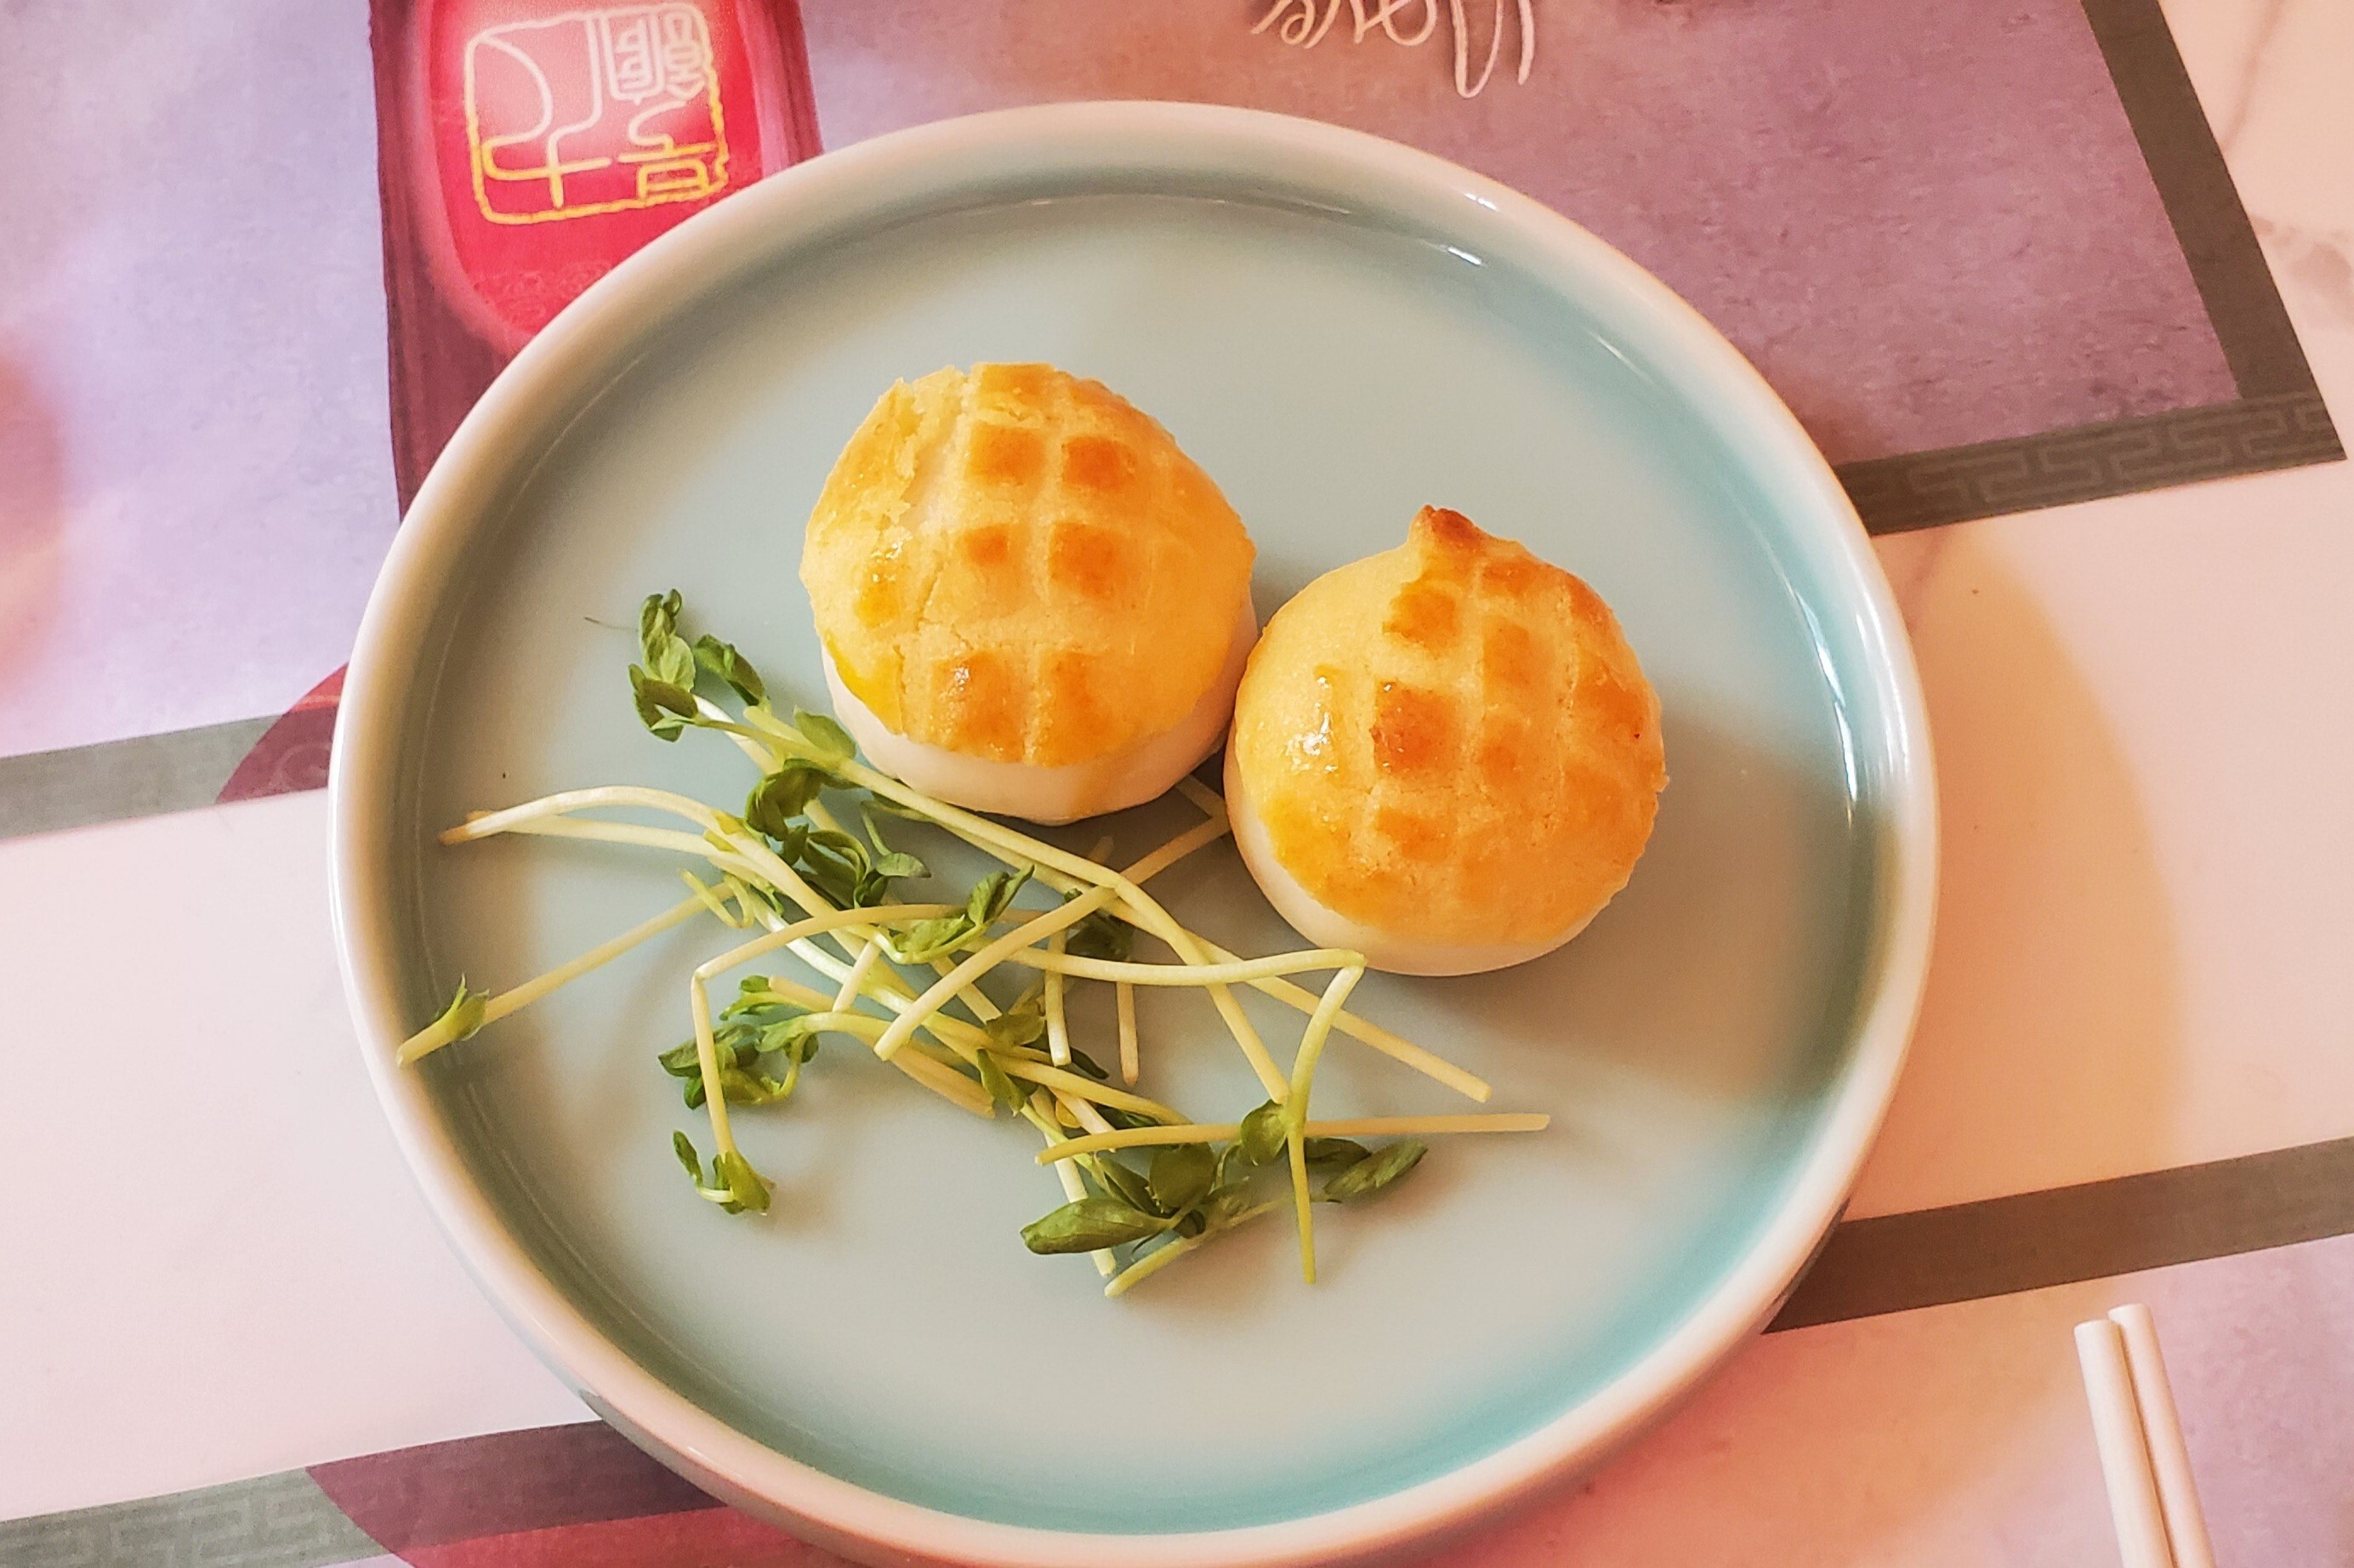 Nove at the Fringe – barbecue pork buns. Photo: Tracey Furniss